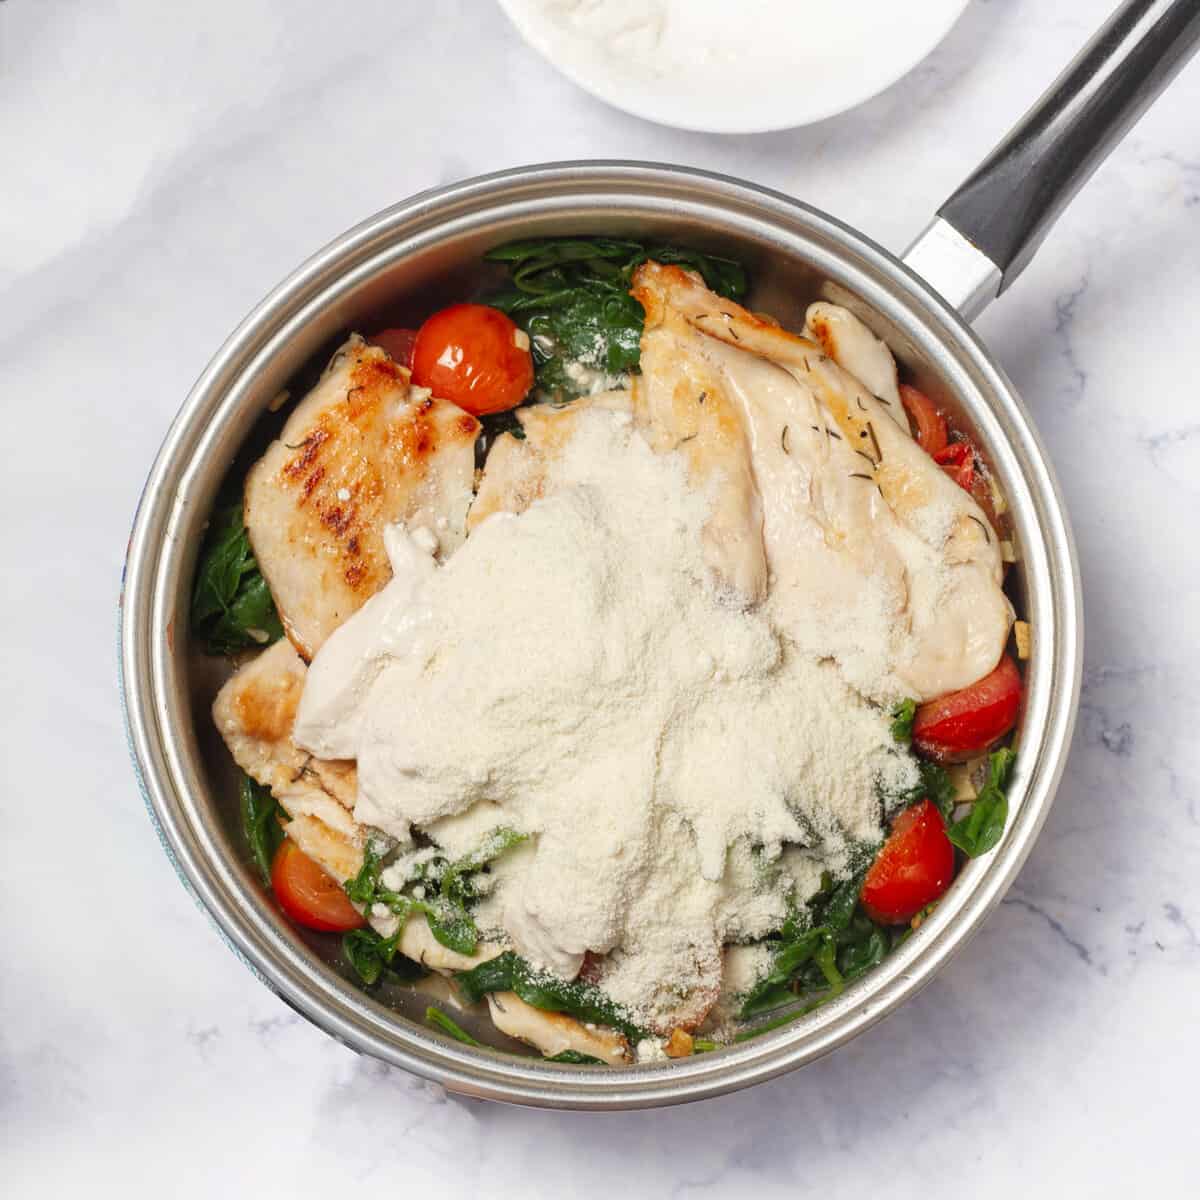 Yogurt and cheese added to the pan of chicken breasts and vegetables.